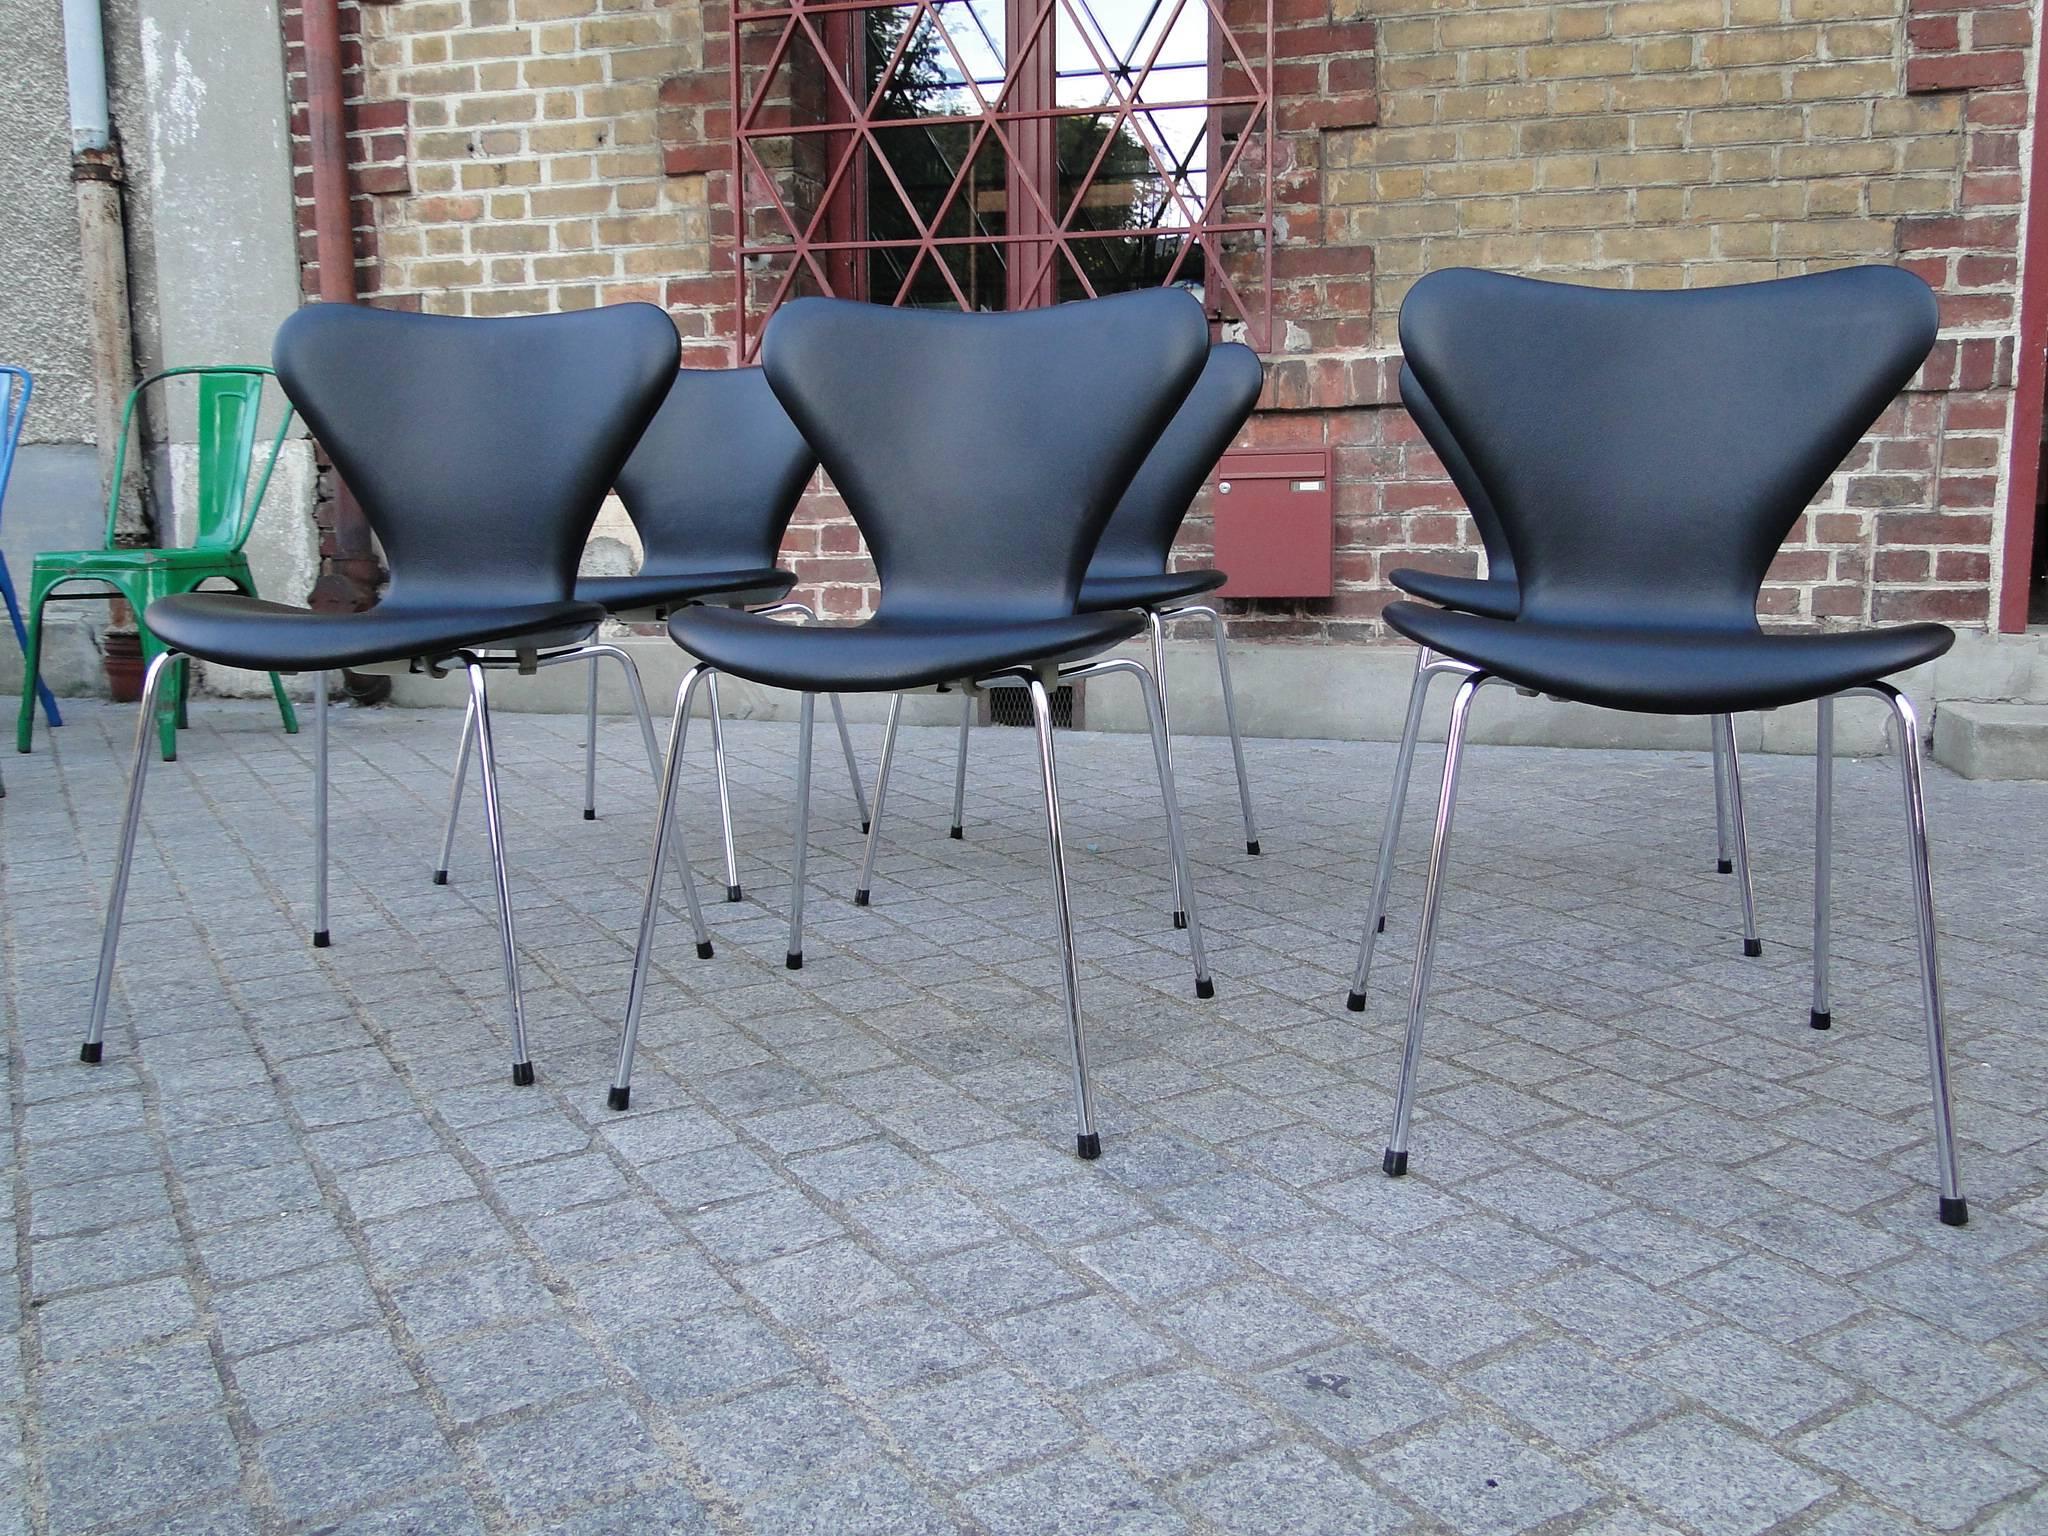 Arne Jacobsen 1902-1971. Six series seven chairs, model 3107. Moulded shell, chromed legs. Produced by Fritz Hansen. Seat H. 44.5 cm. Newly reupholstered by a professional upholsterer in black leather from Arne Sørensen.